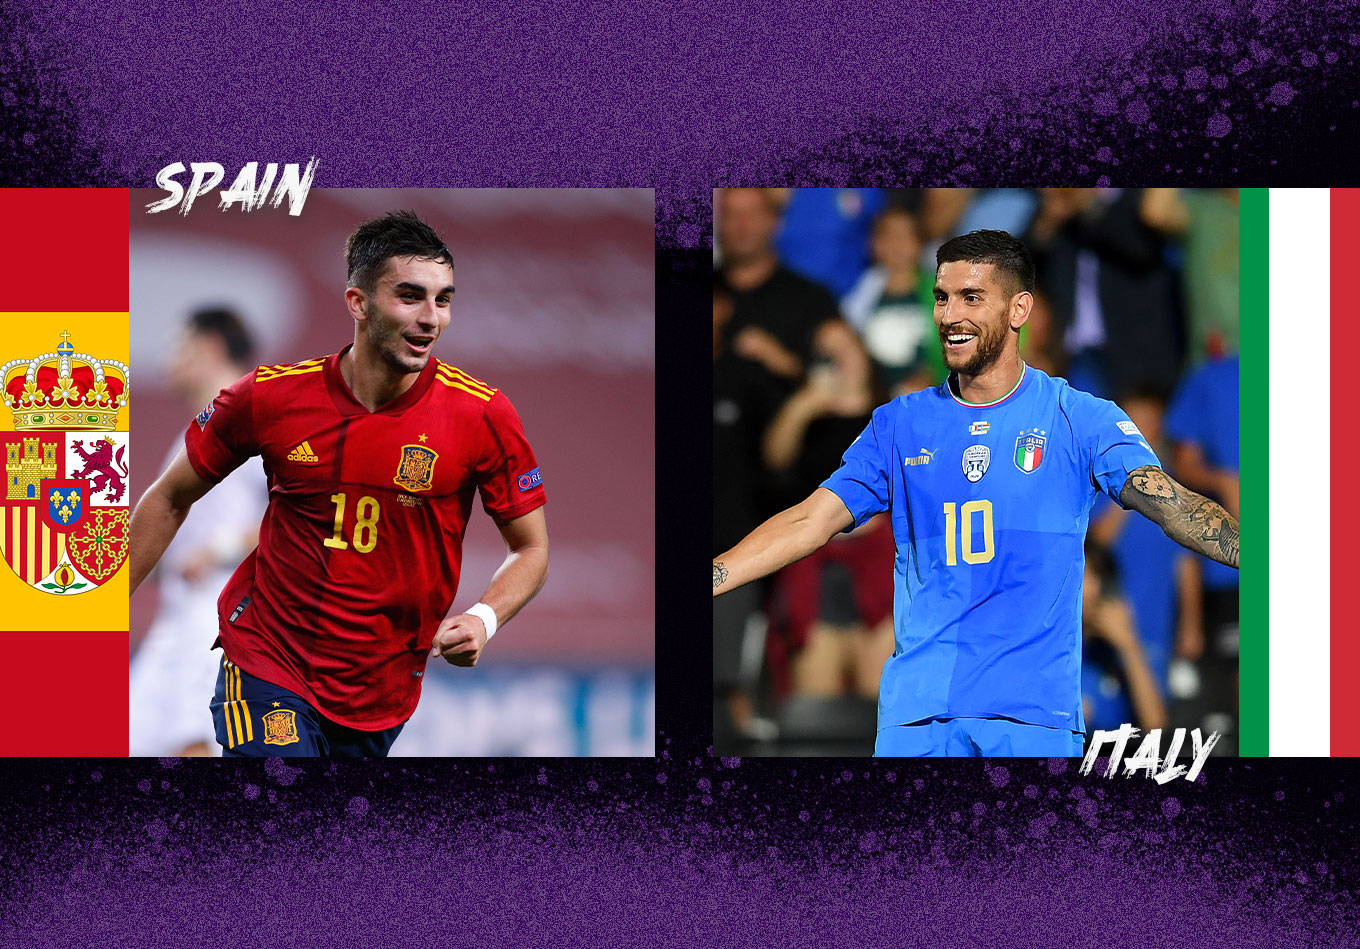 Spain vs Italy: UEFA Nations League Preview and Prediction